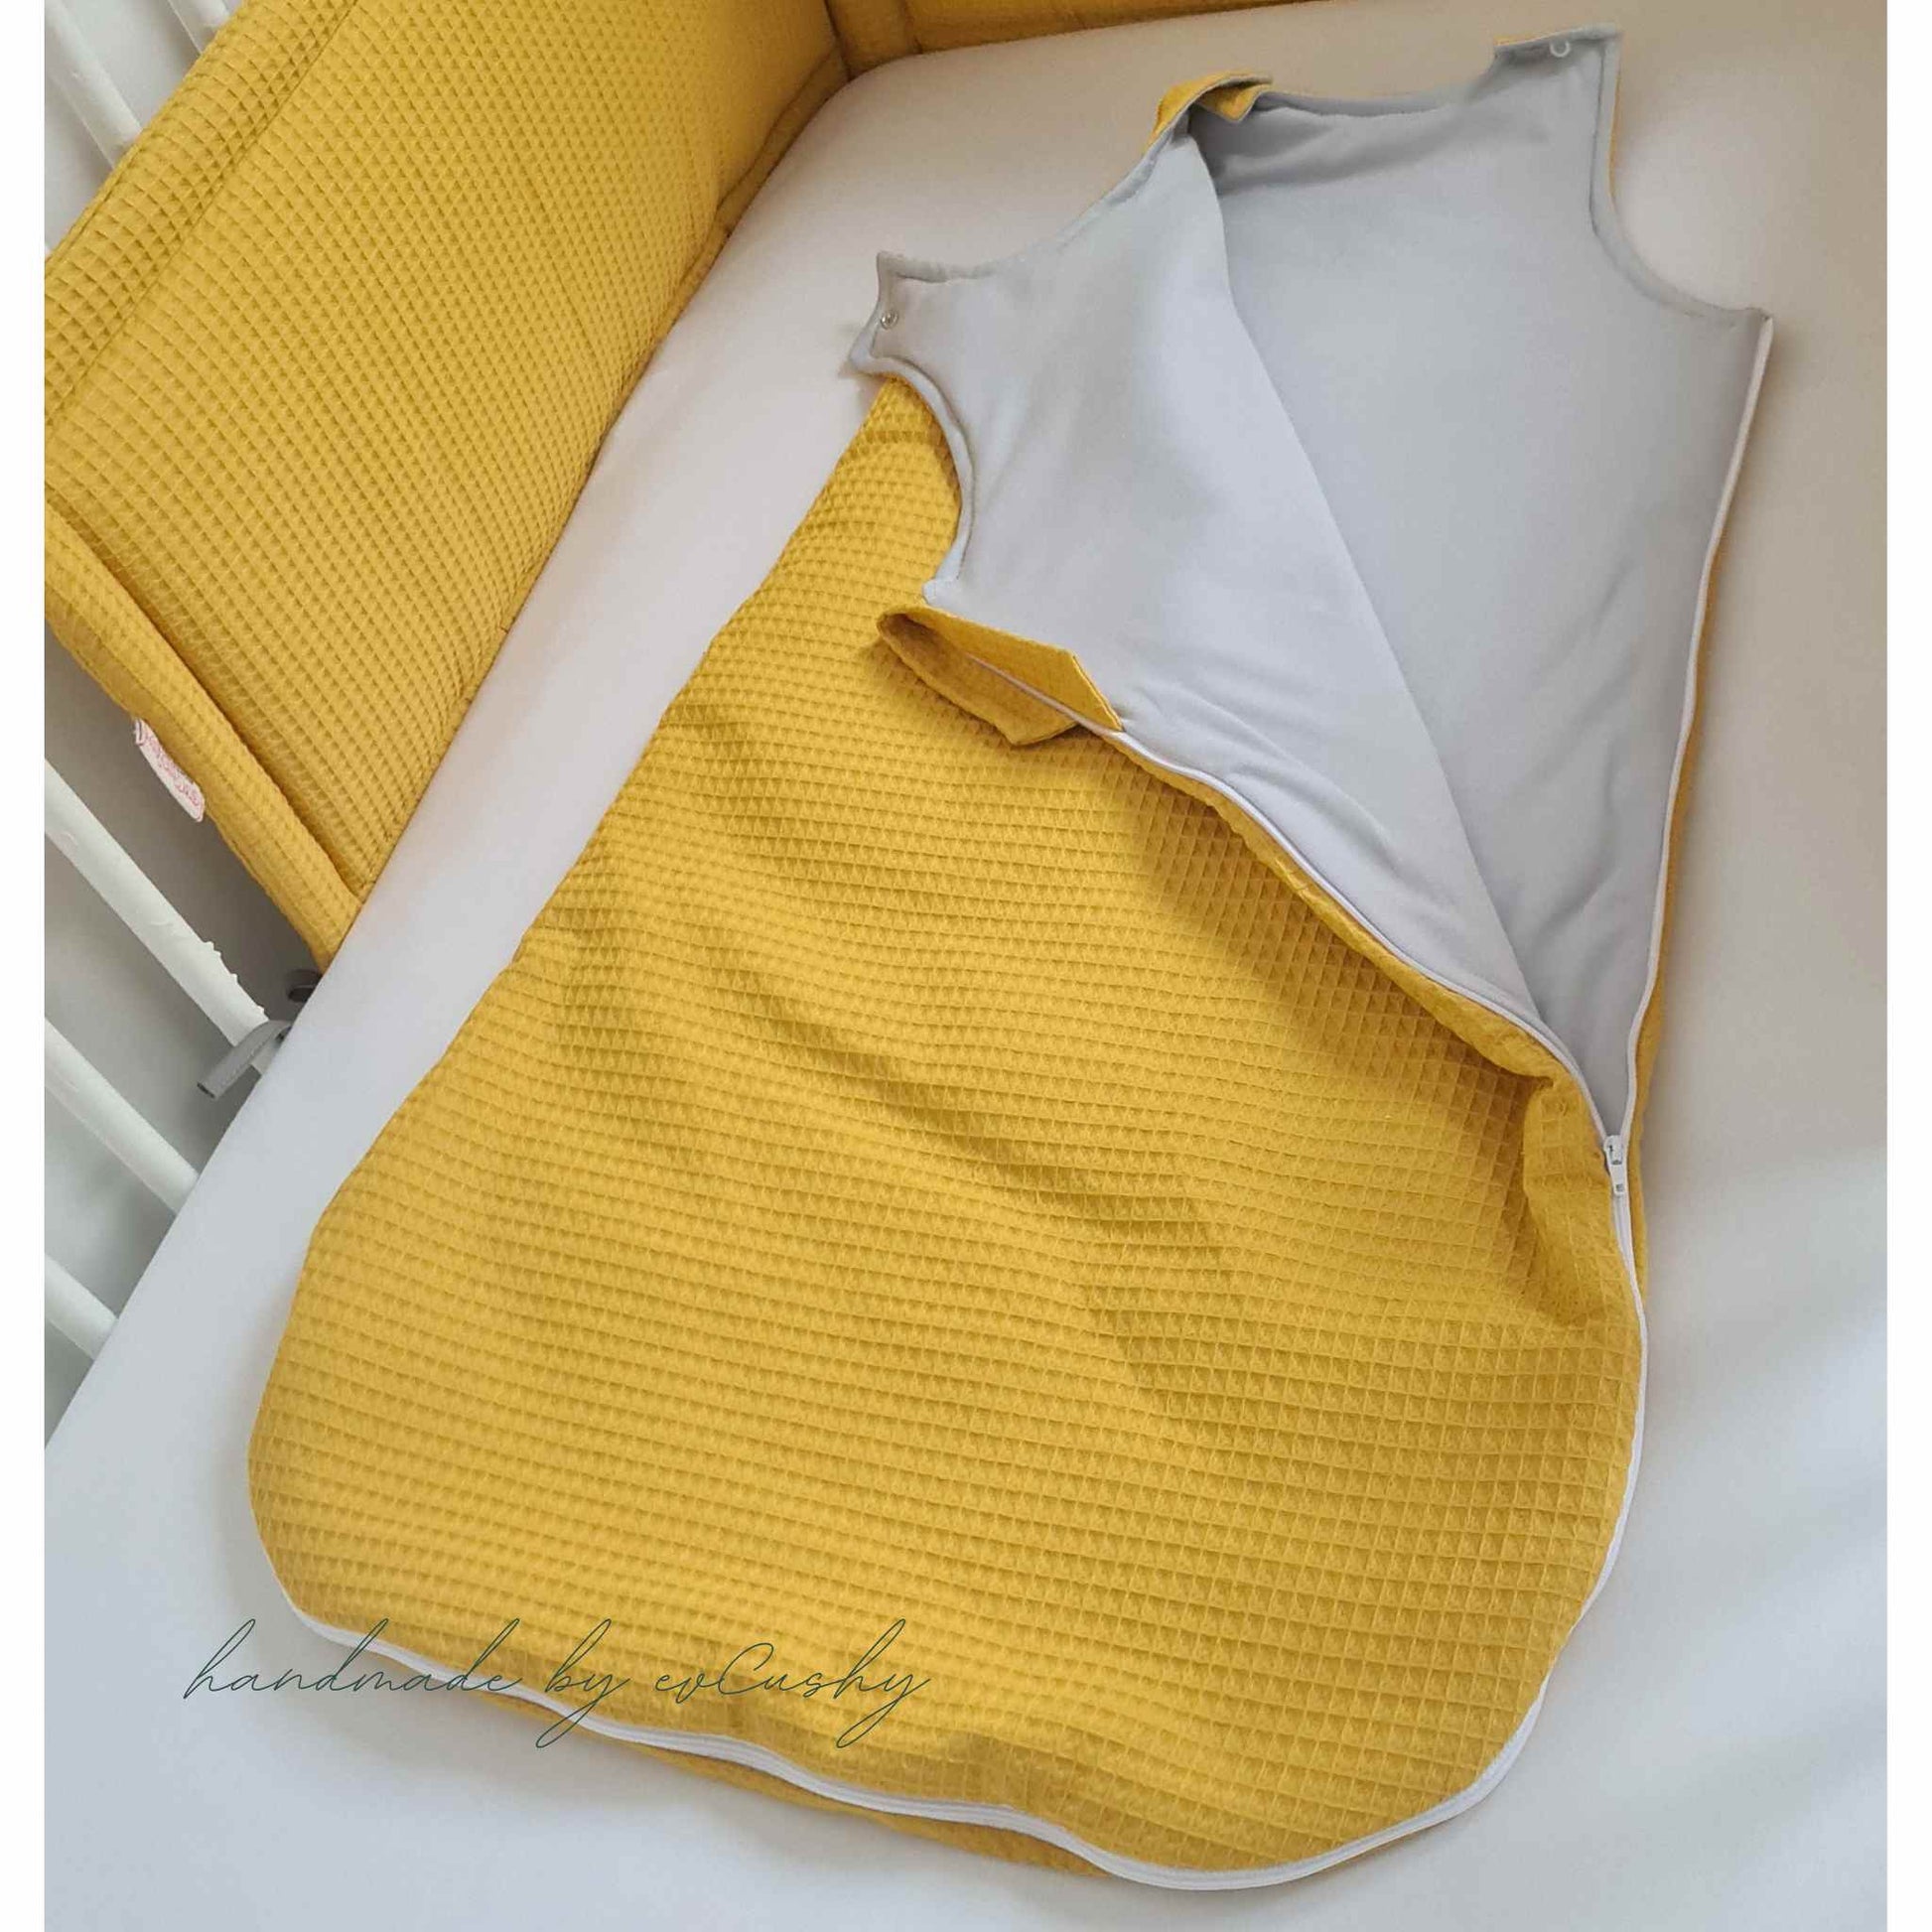 plain sleeping bag for baby mustard, 100% cotton 6-18 months in Ireland 90cm long 1.5 tog